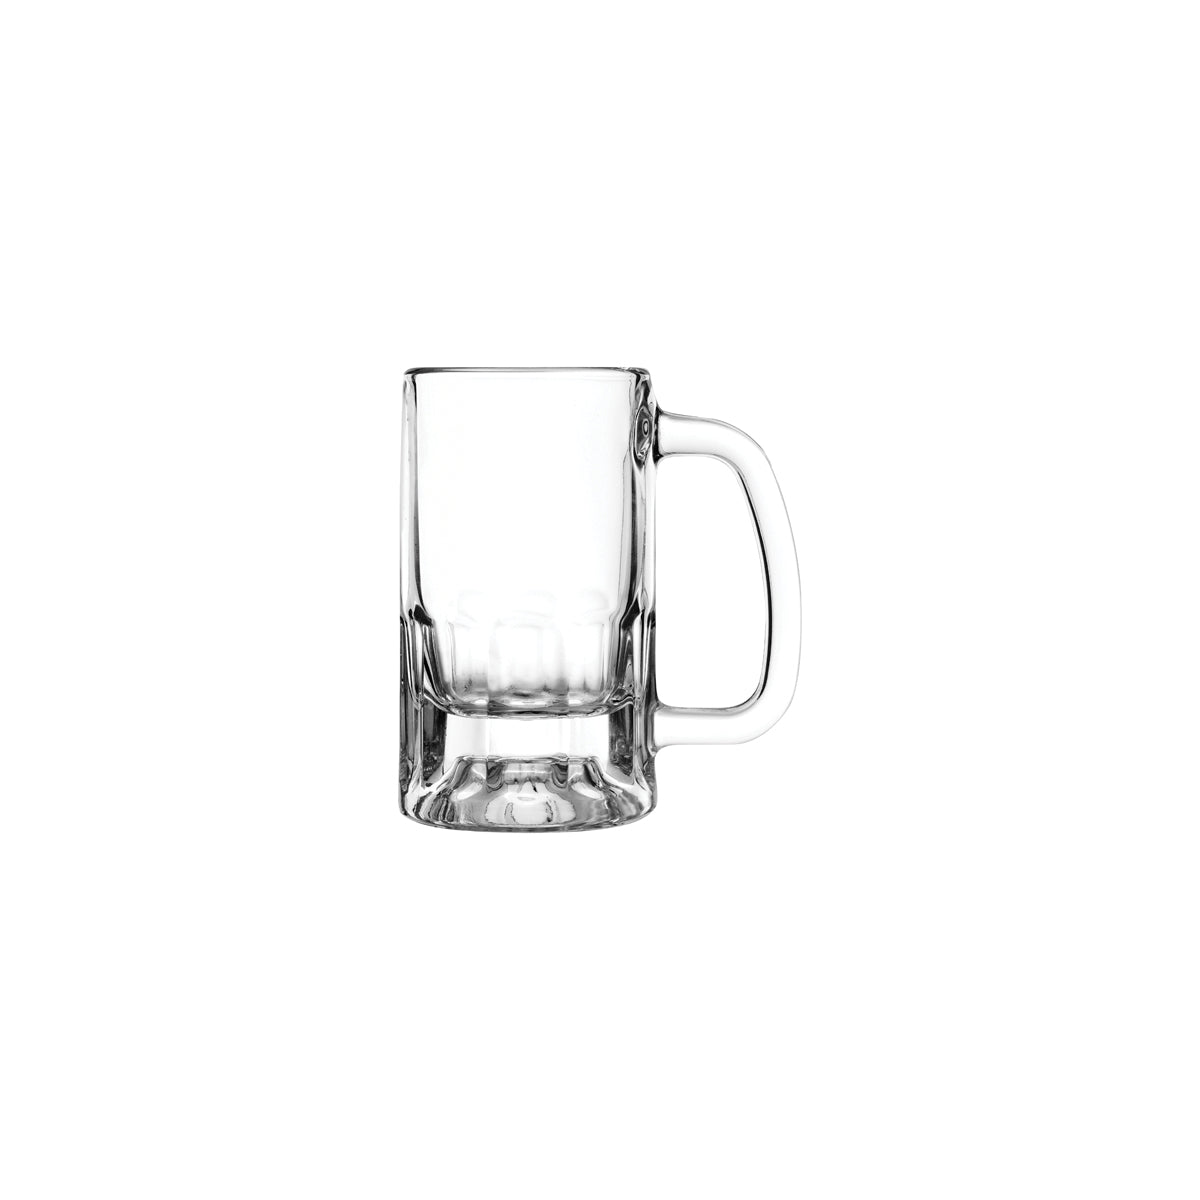 Tarro Libations Beer Mug - 300 ml from Libbey. made out of Glass and sold in boxes of 24. Hospitality quality at wholesale price with The Flying Fork! 